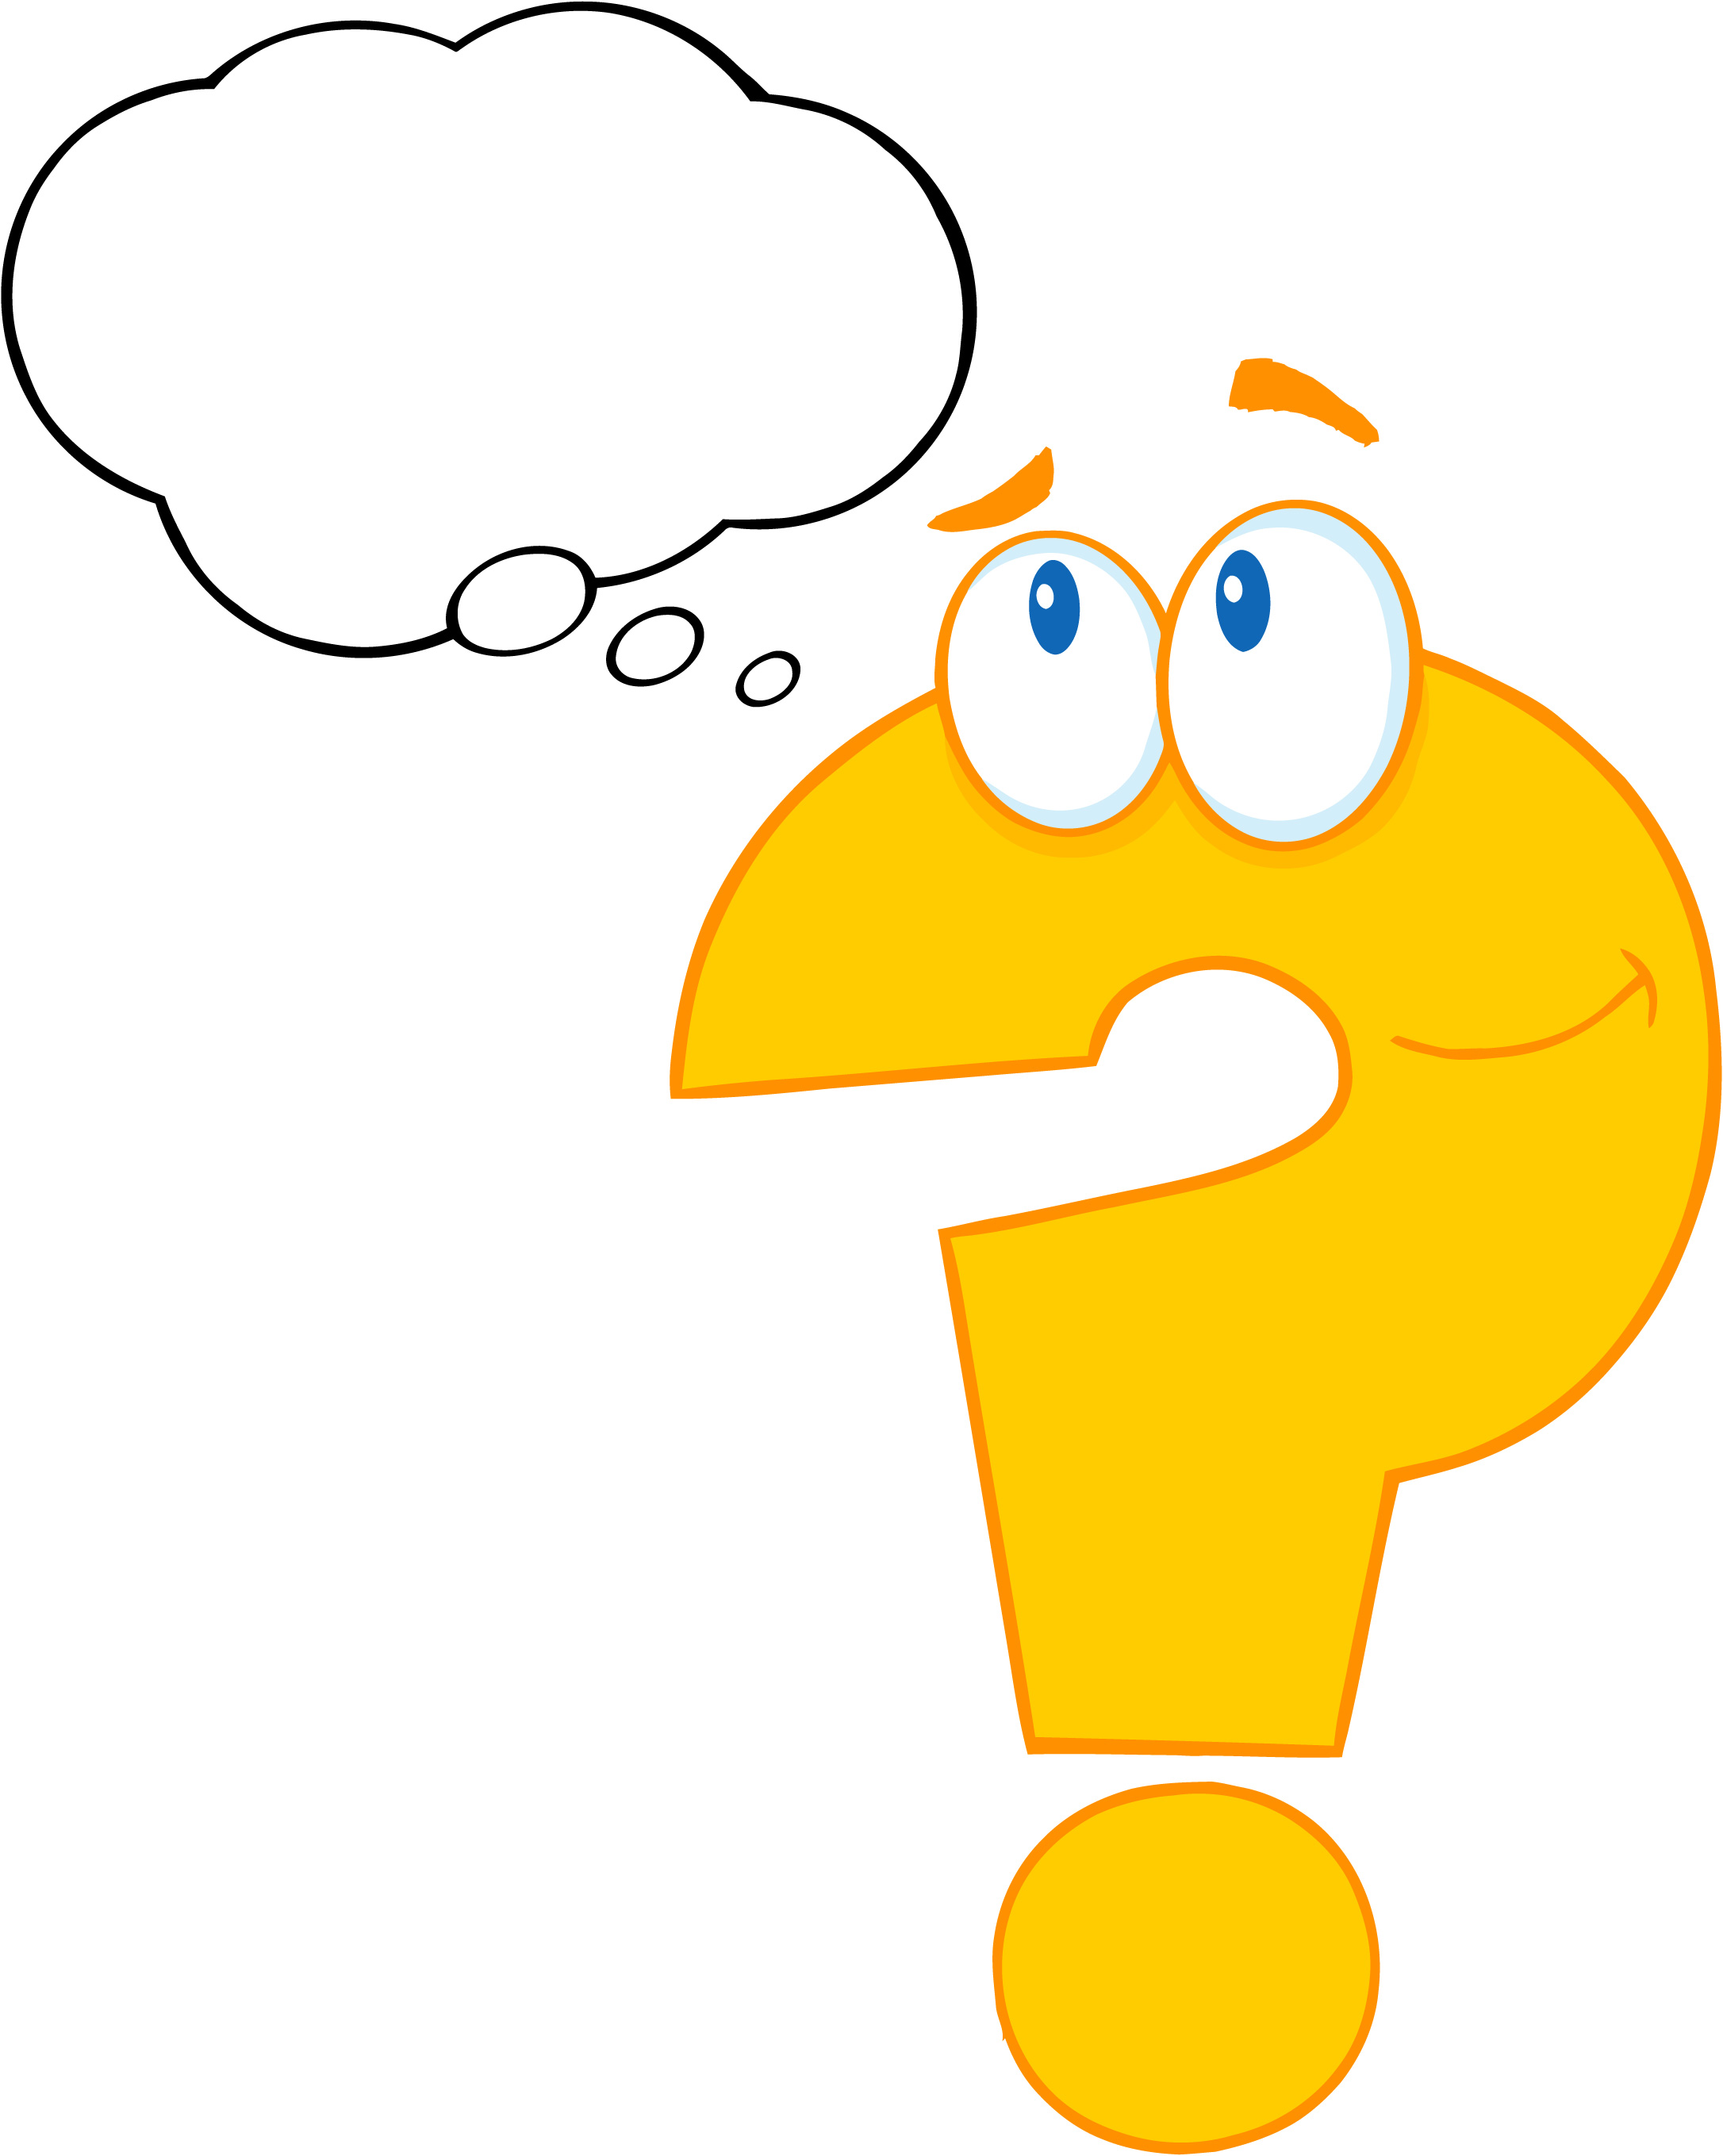 questions animated clip art free - photo #24